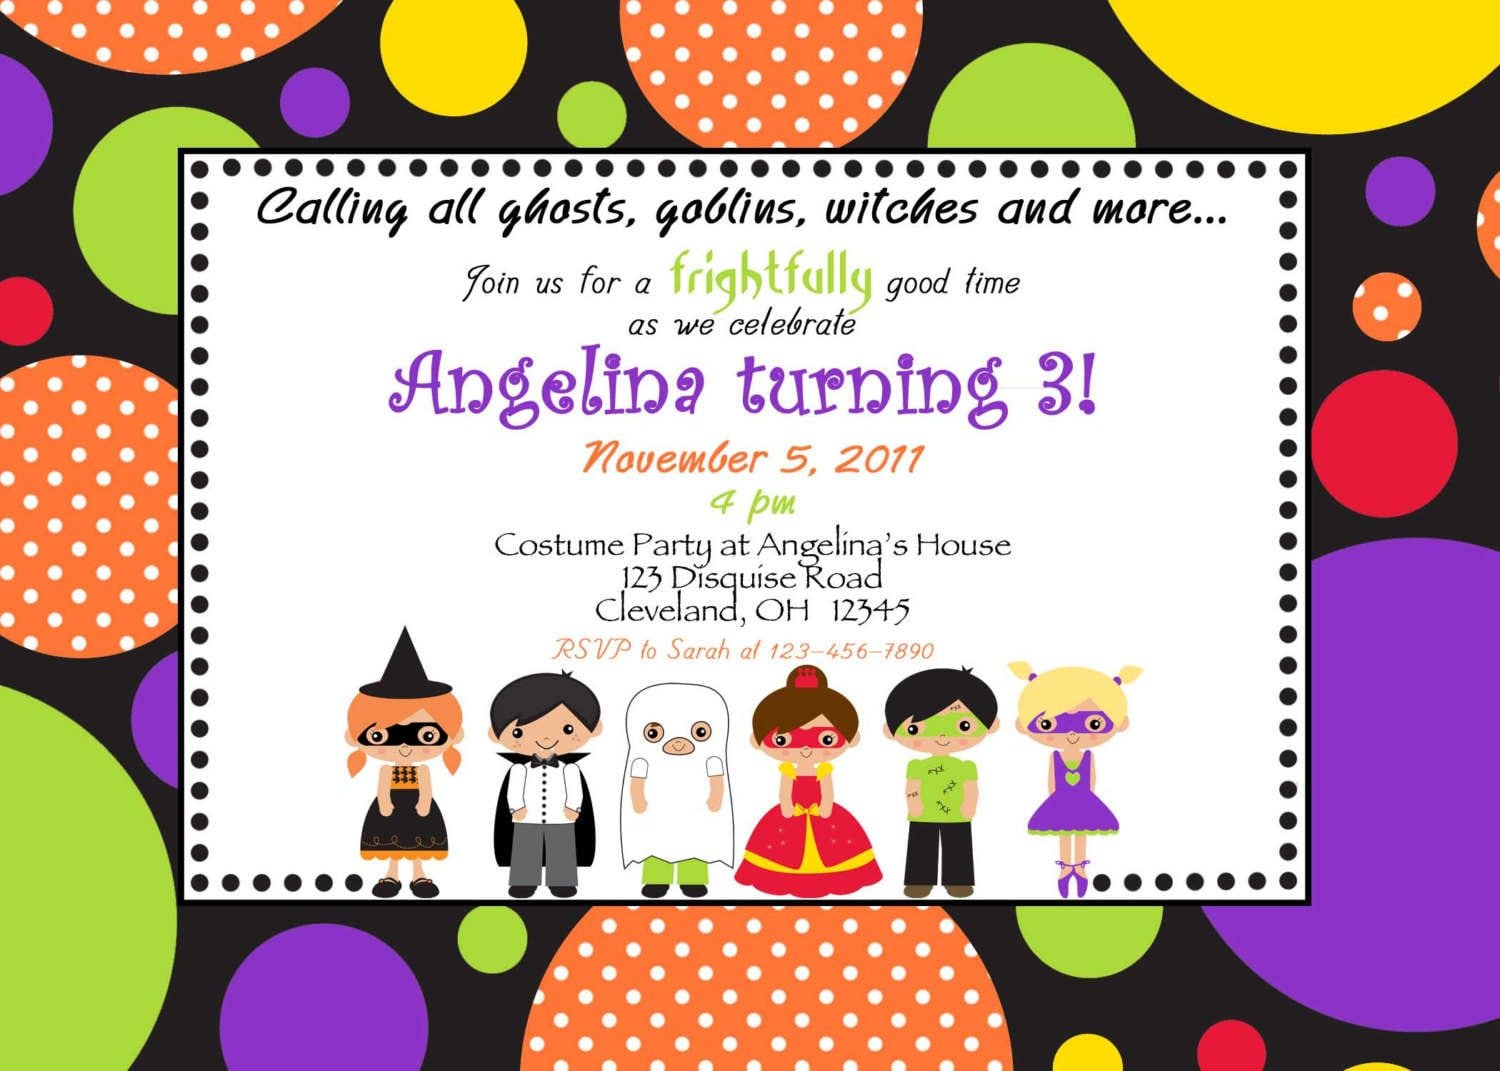 Costume Birthday Party Invitations Alluring Costume Birthday Party